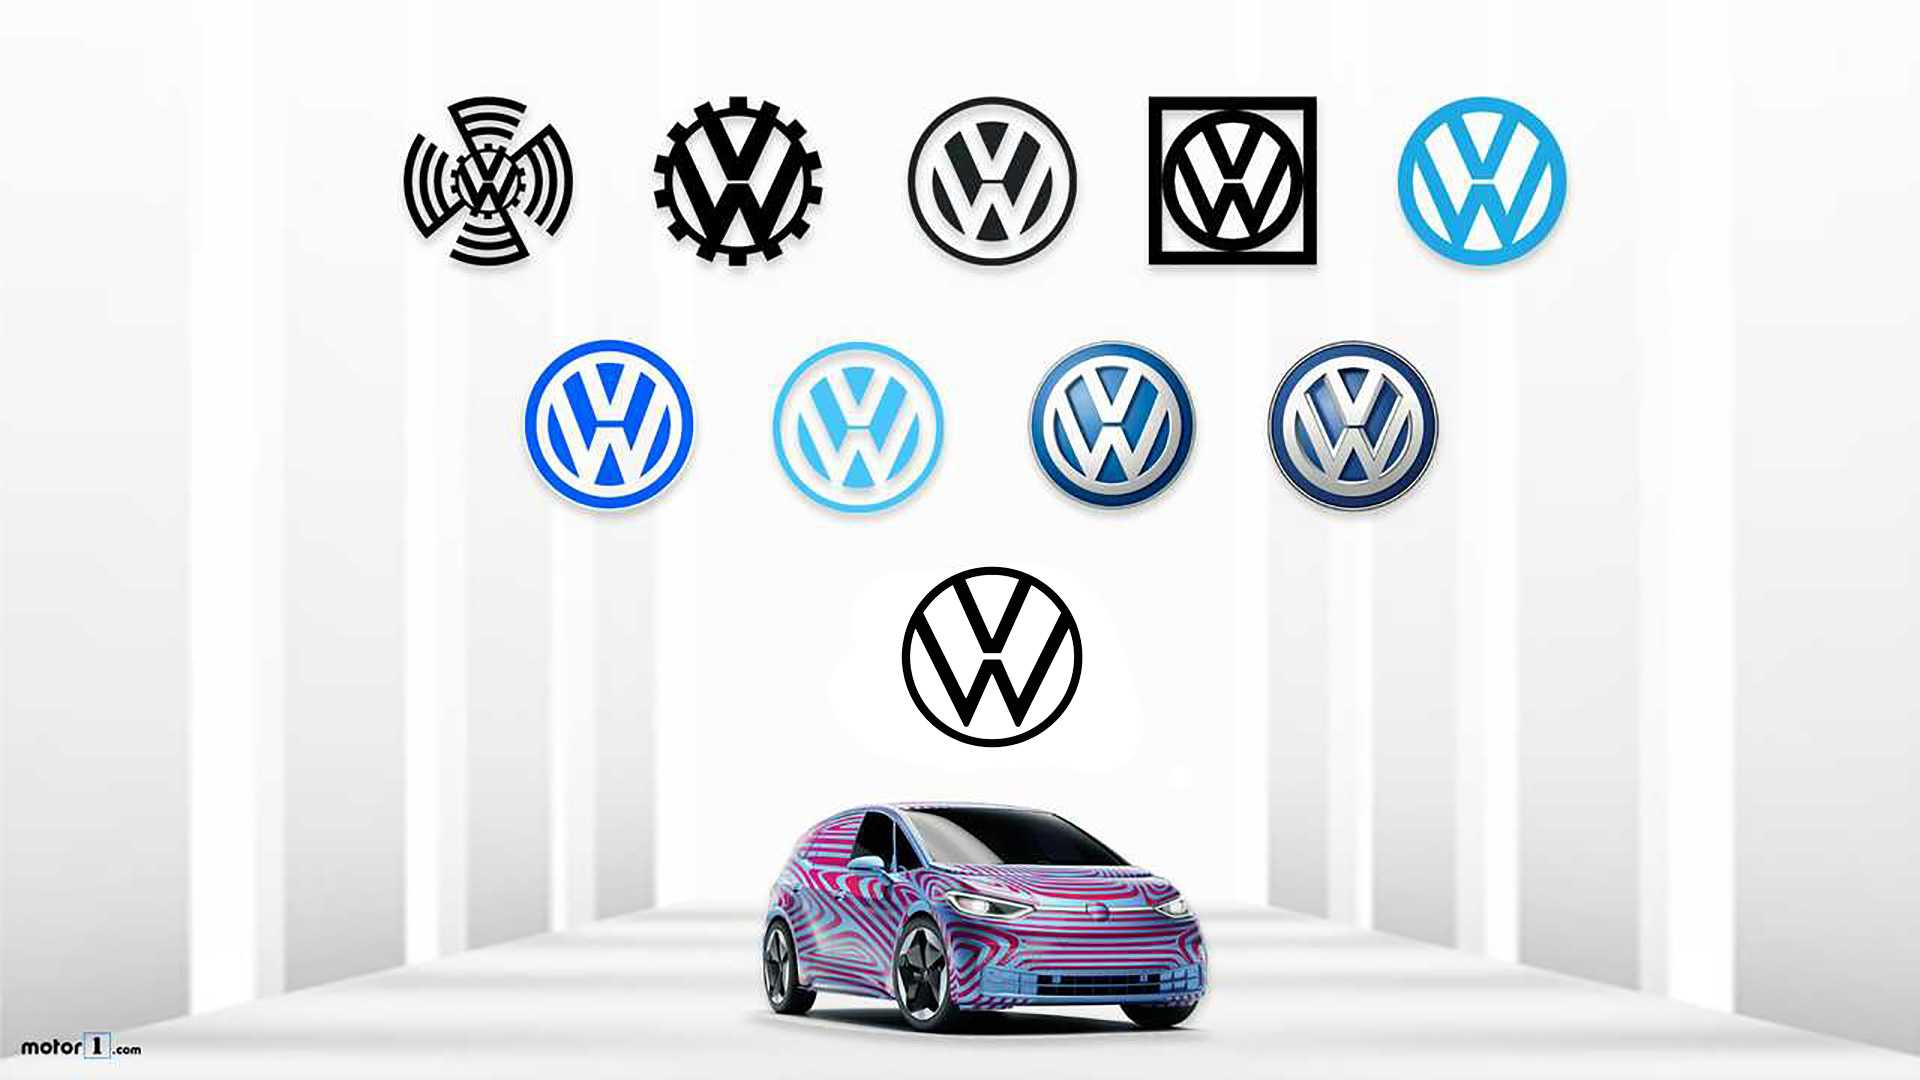 1920x1080 The History Of The VW Logo From 1937 To Today